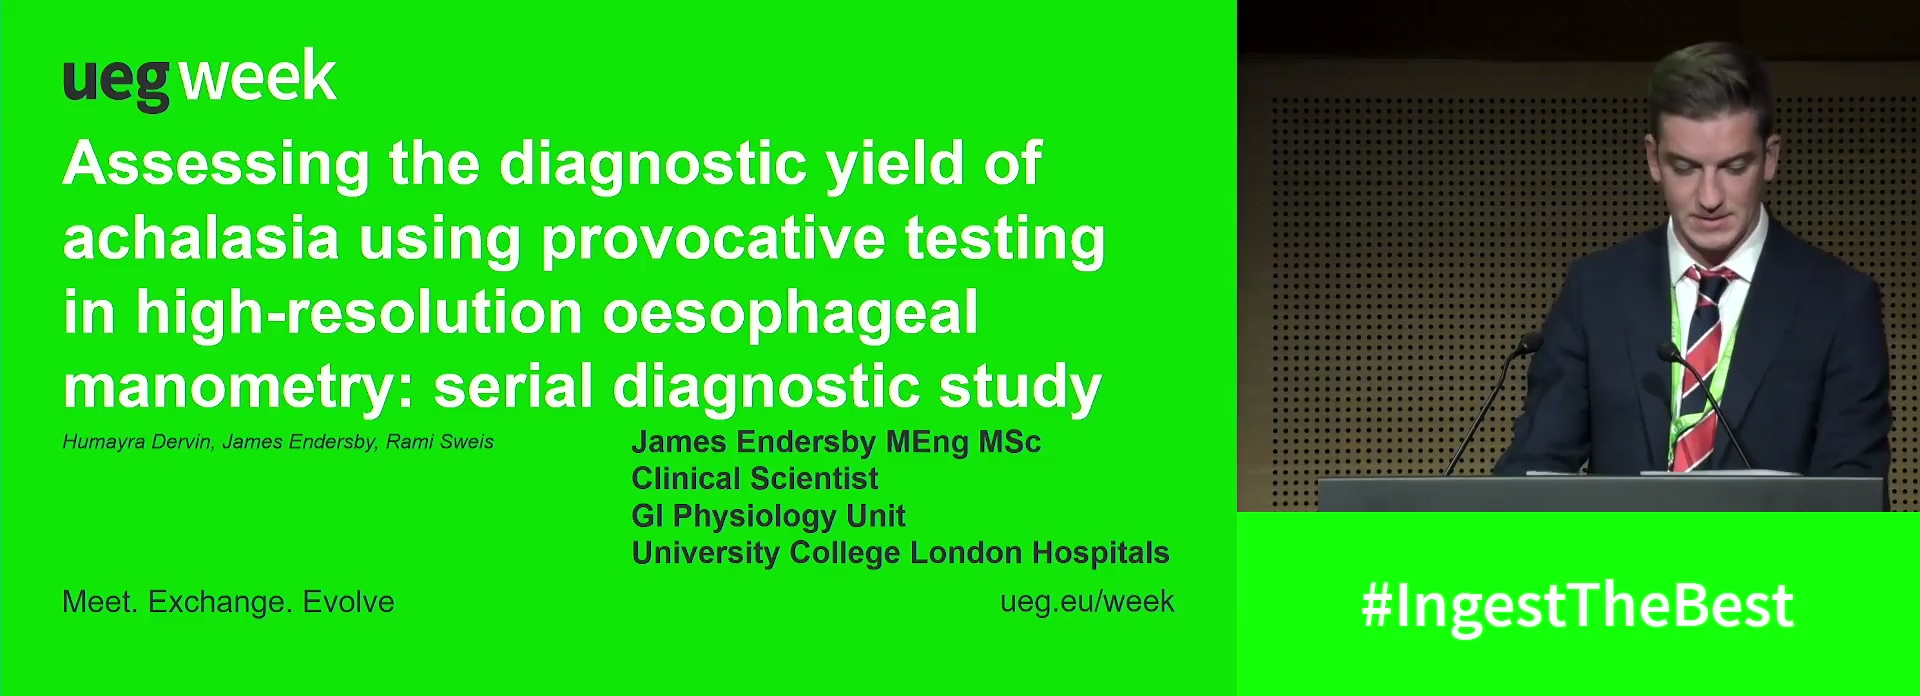 ASSESSING THE DIAGNOSTIC YIELD OF ACHALASIA USING PROVOCATIVE TESTING IN HIGH-RESOLUTION MANOMETRY